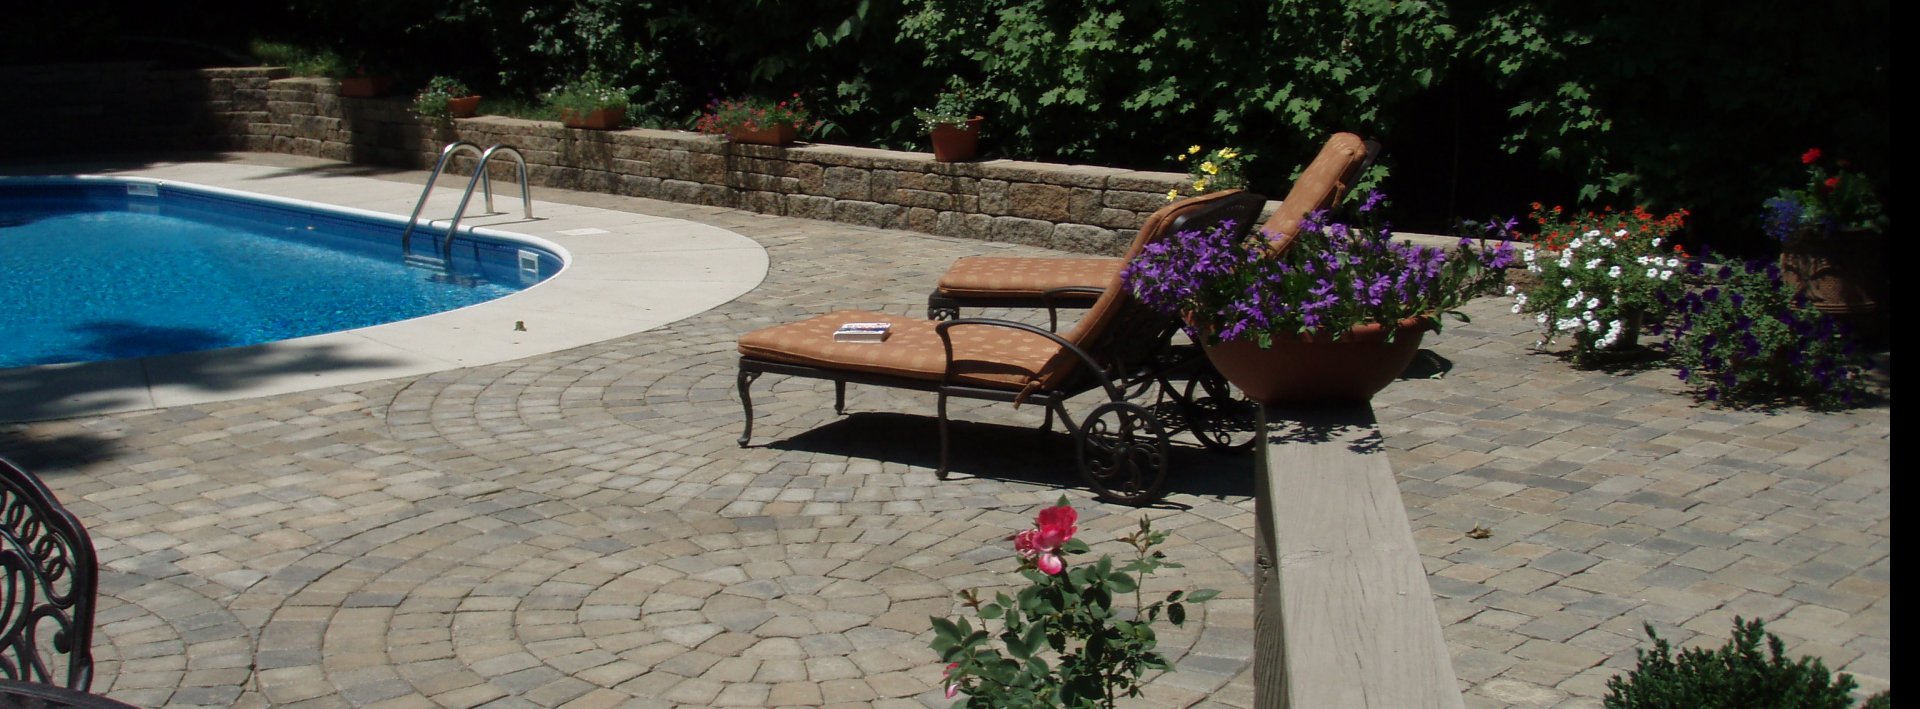 Pavers with Retaining wall